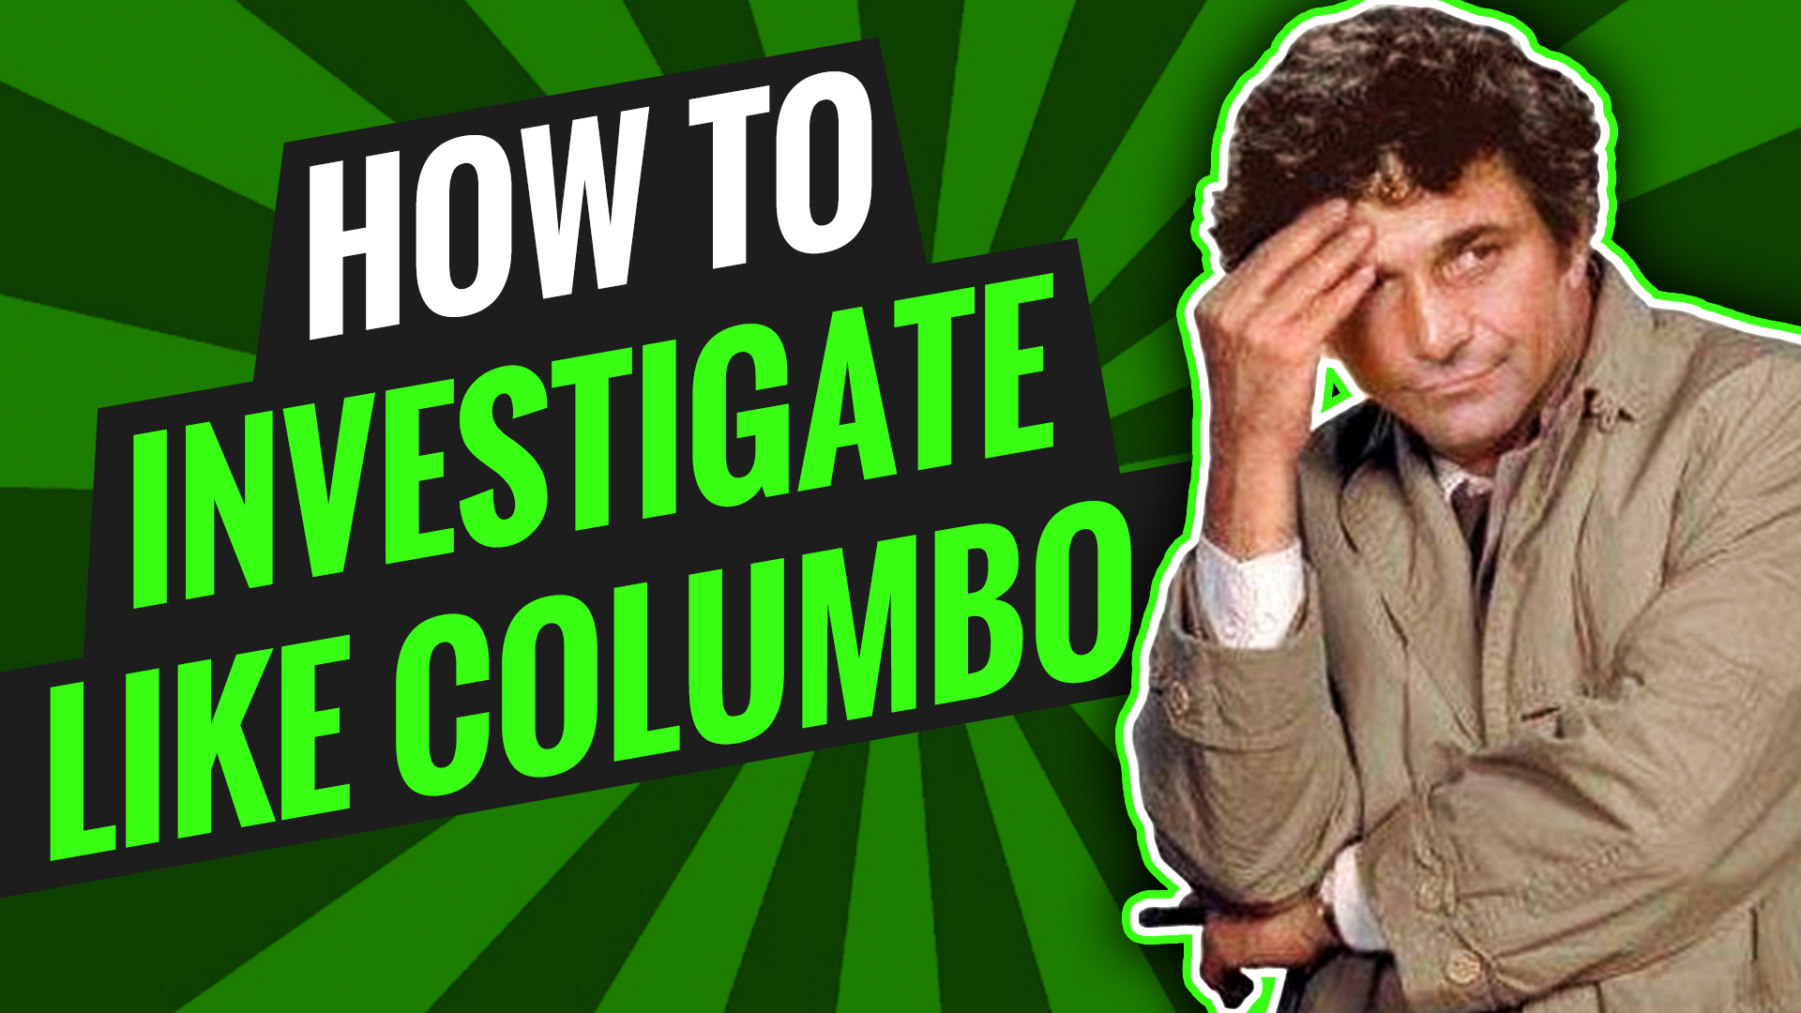 How To Investigate Like Columbo [VIDEO]